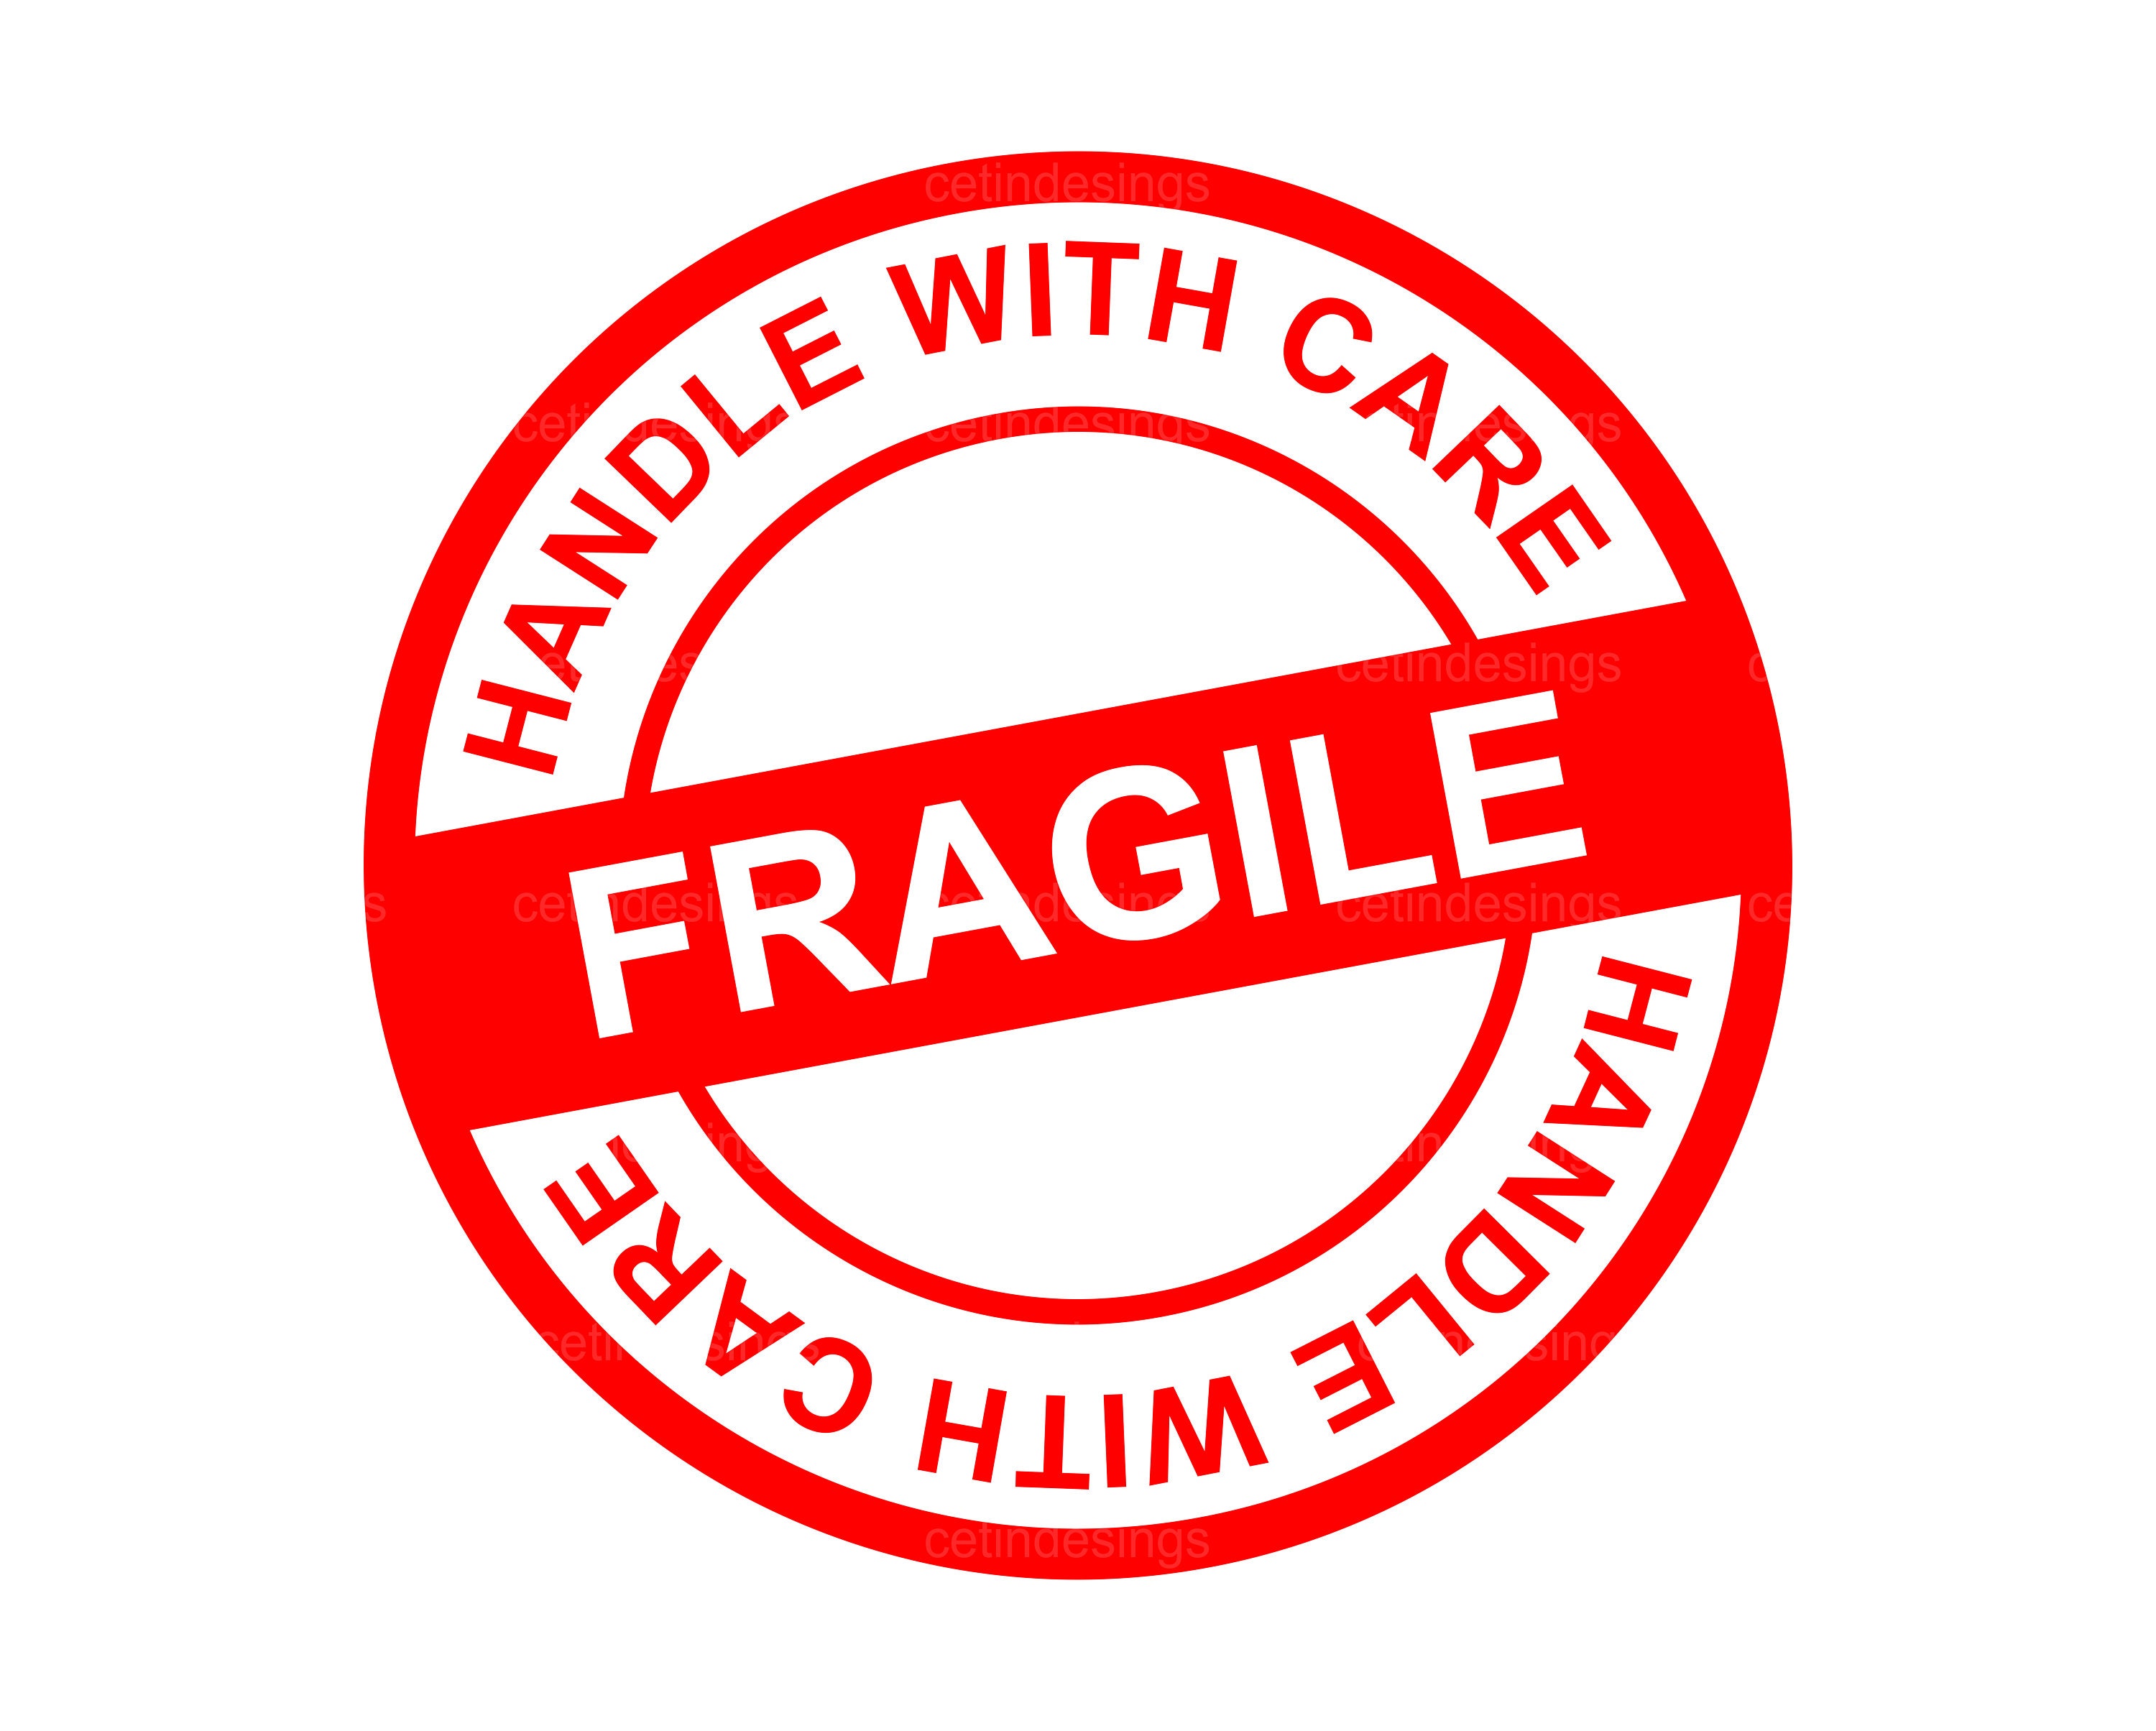 aaron lun recommends fragile handle with care xxx pic